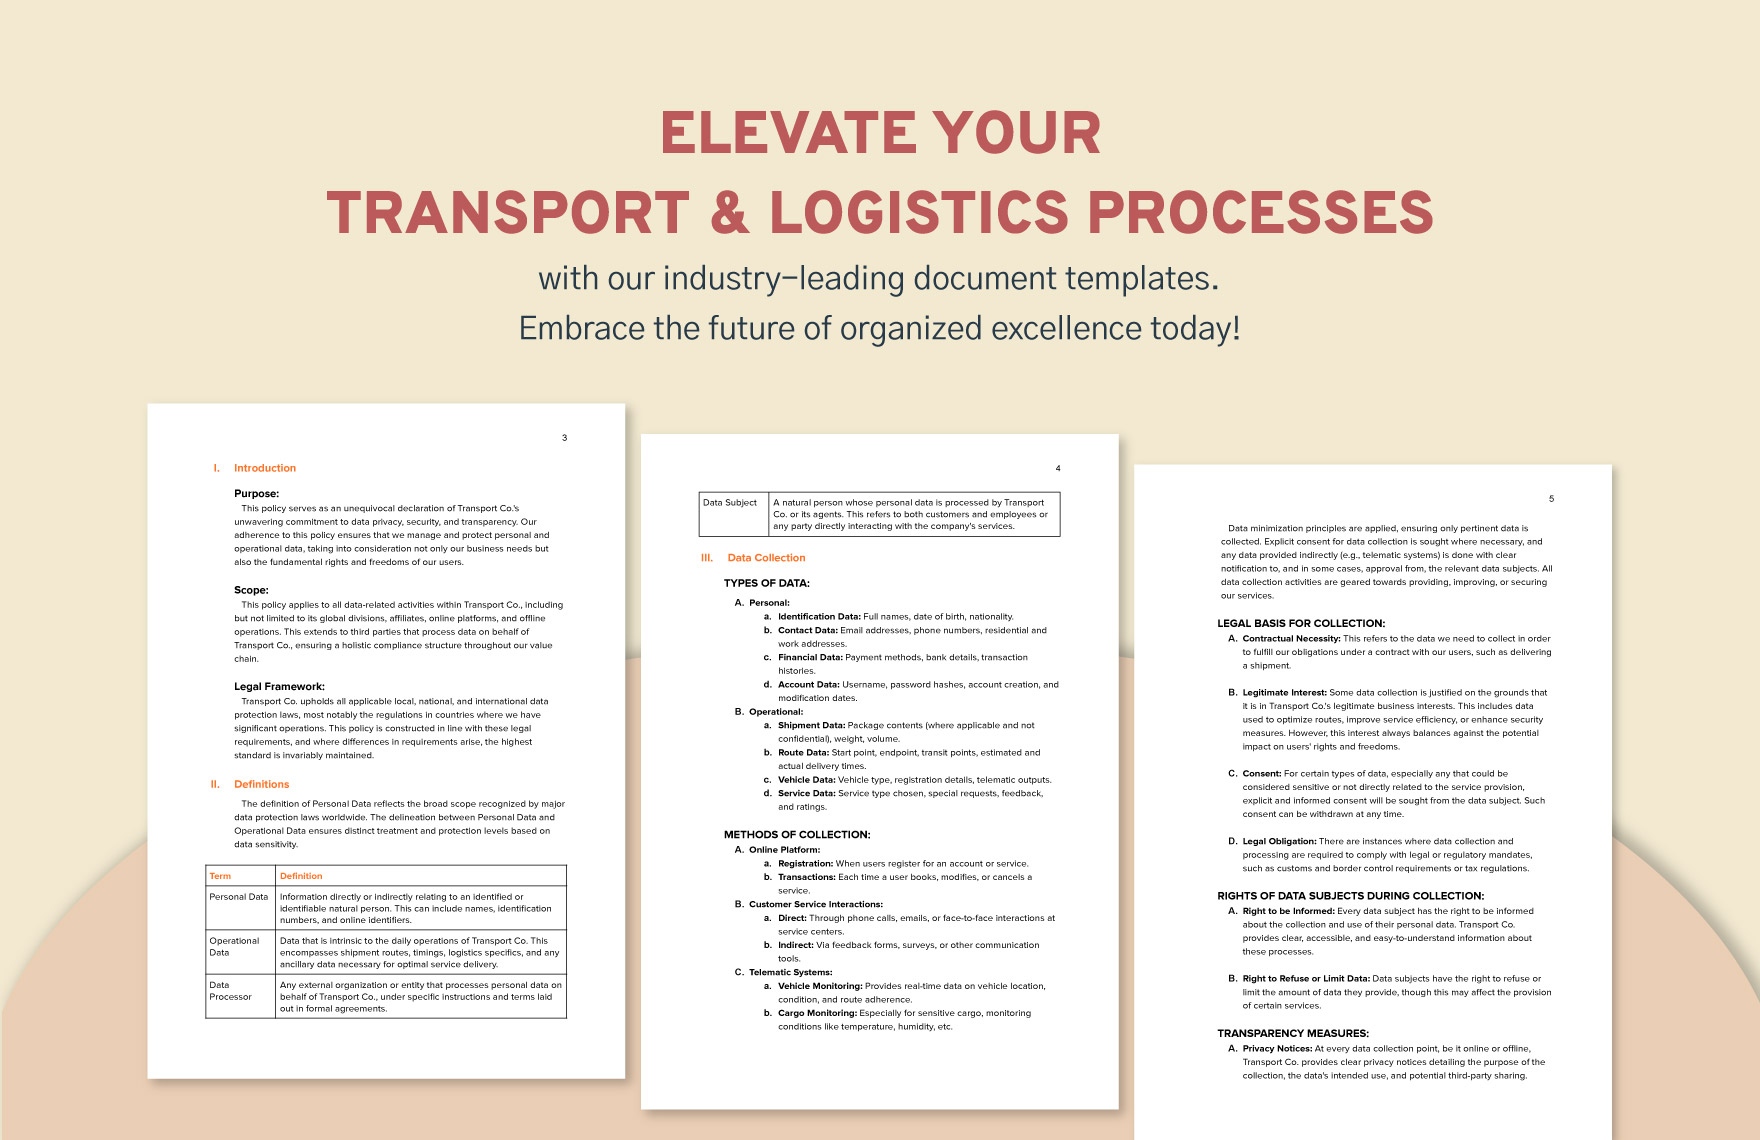 Transport and Logistics Data Privacy Policy Template